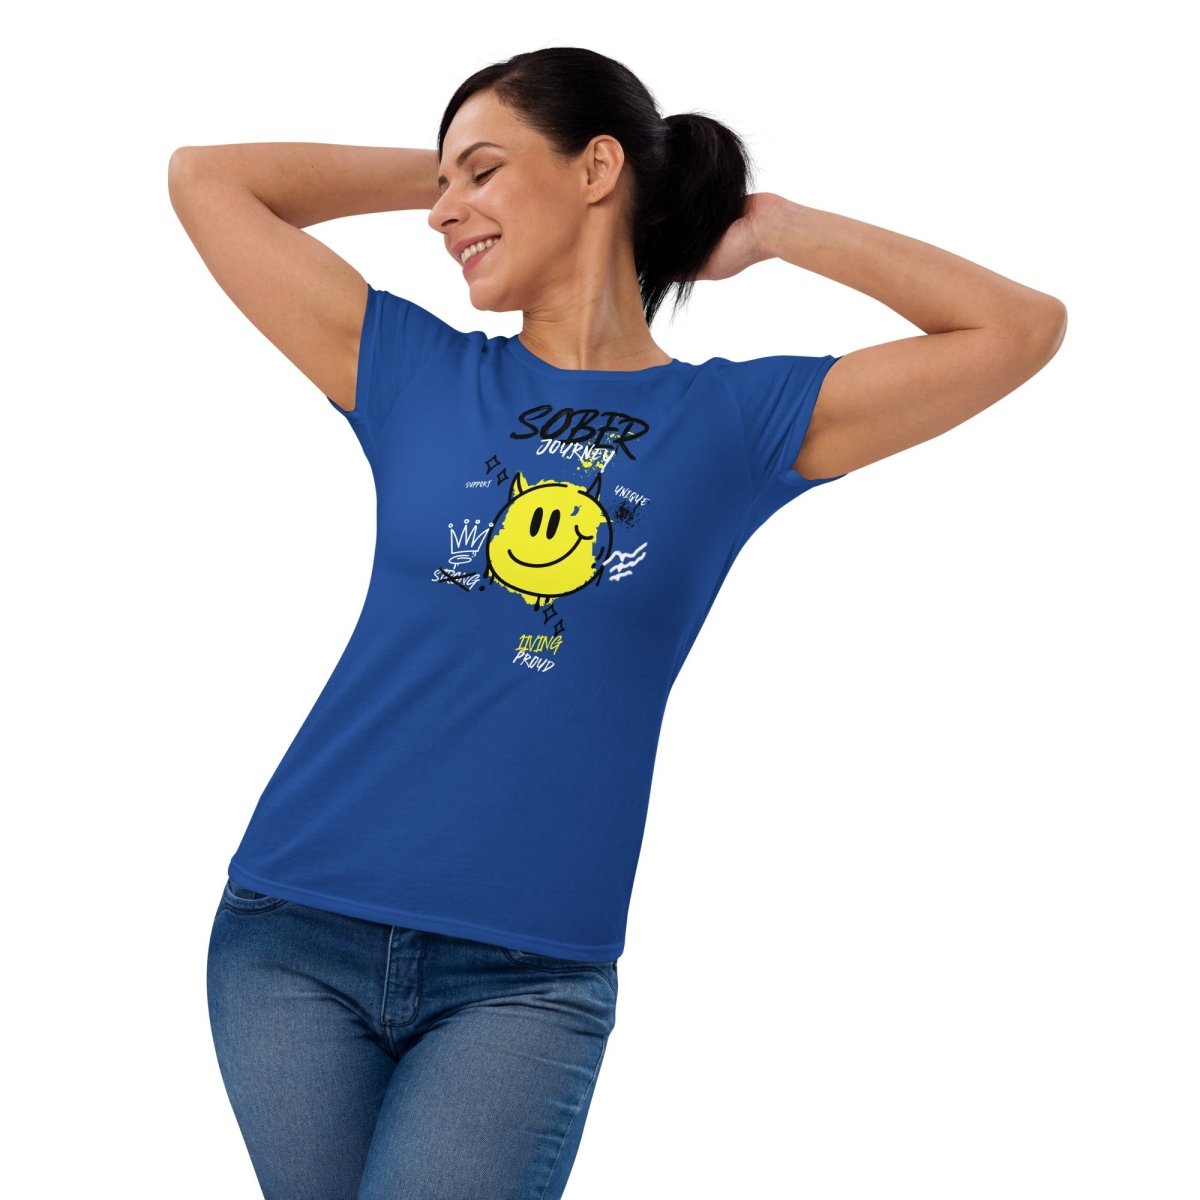 SoberFit Smiley Women's Tee - Bright Sobriety Line - Sobervation